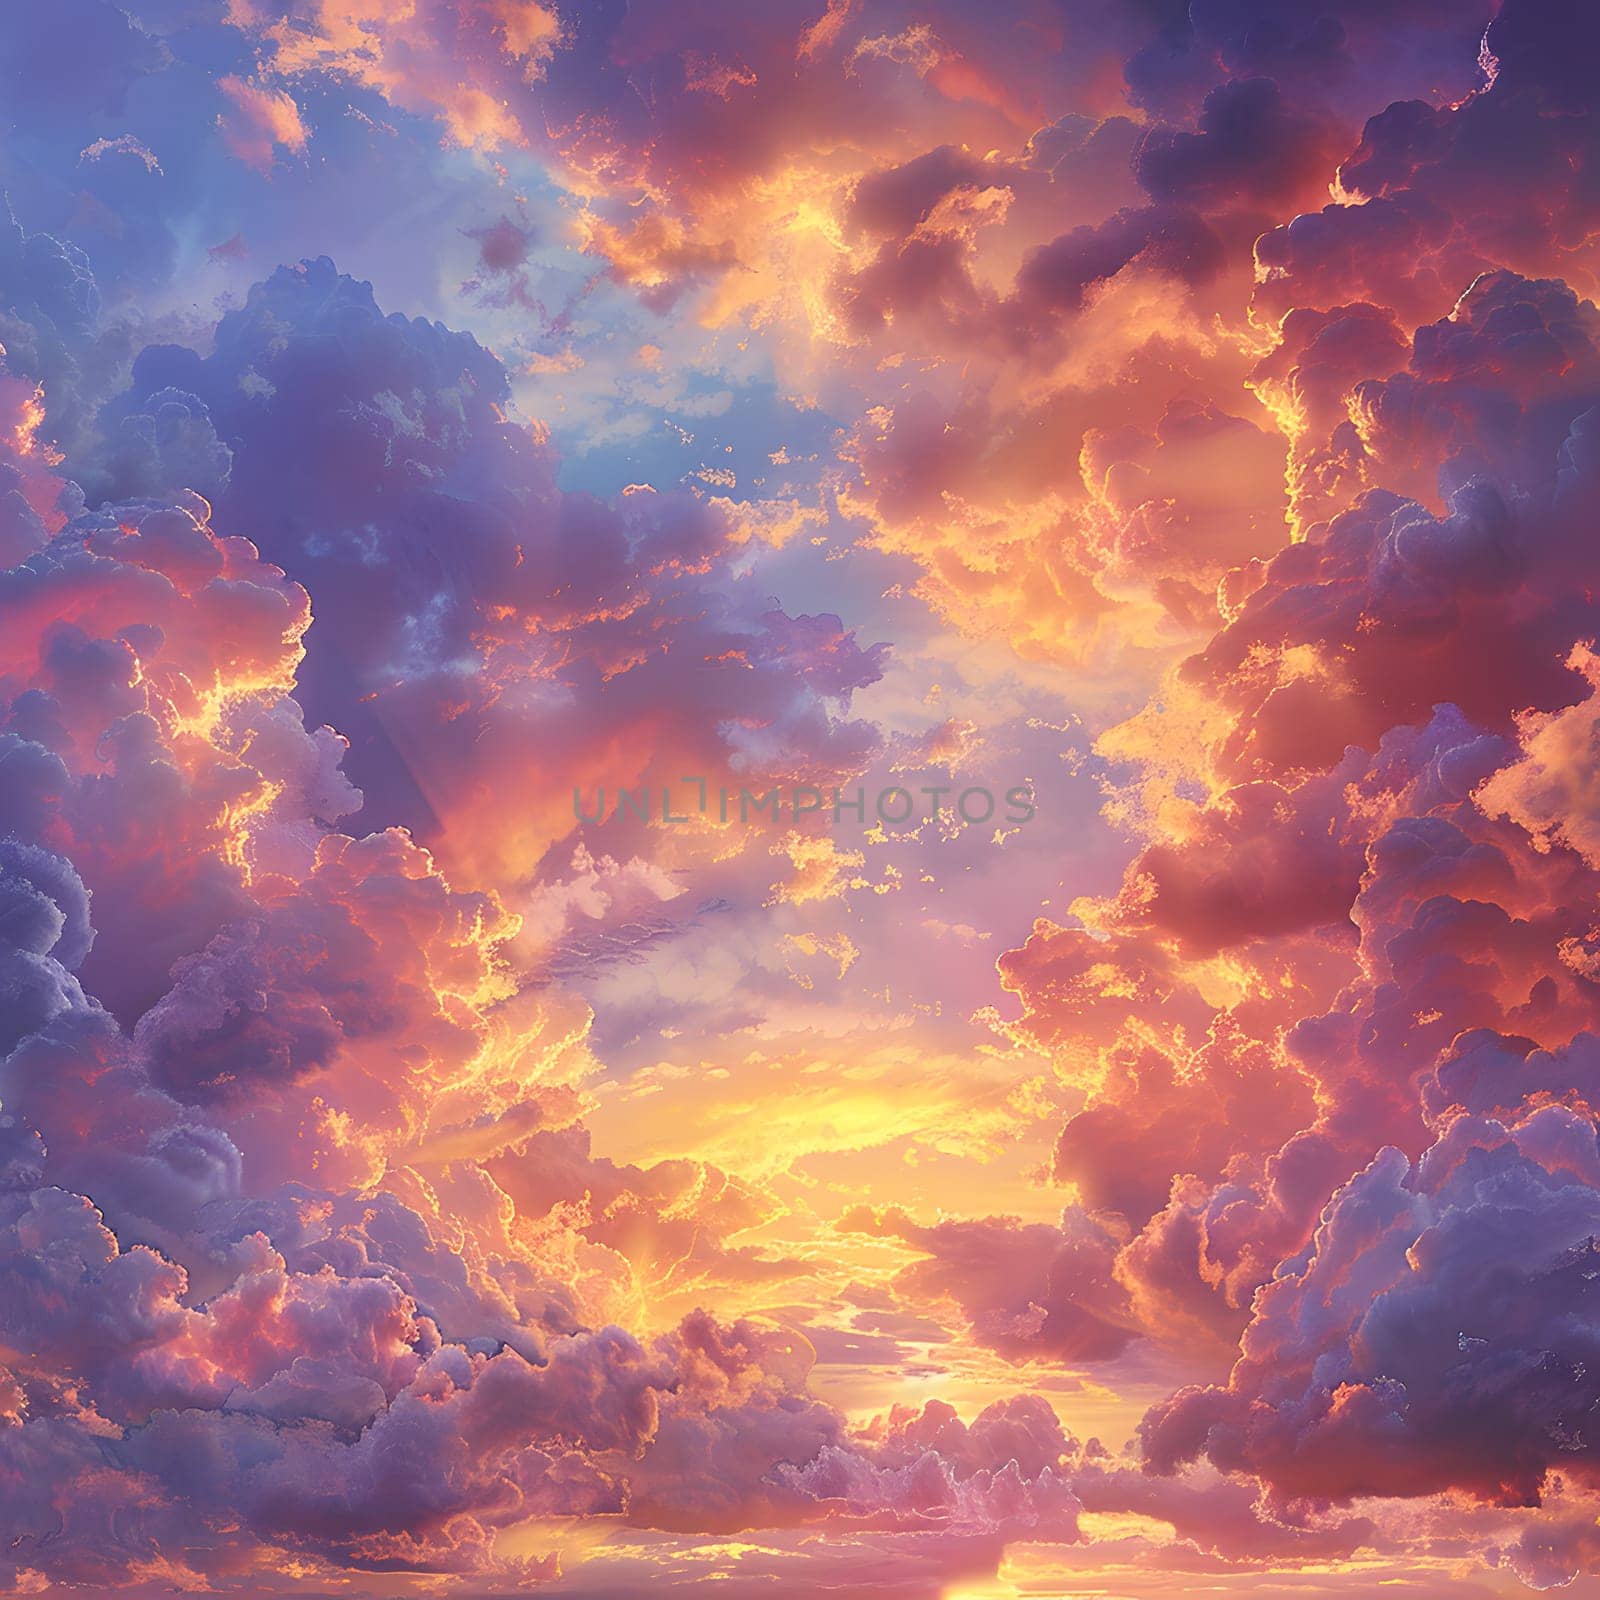 The sky was filled with fluffy cumulus clouds during the sunset, creating a stunning afterglow of orange and red hues. The natural landscape was painted with sunlight as dusk settled in